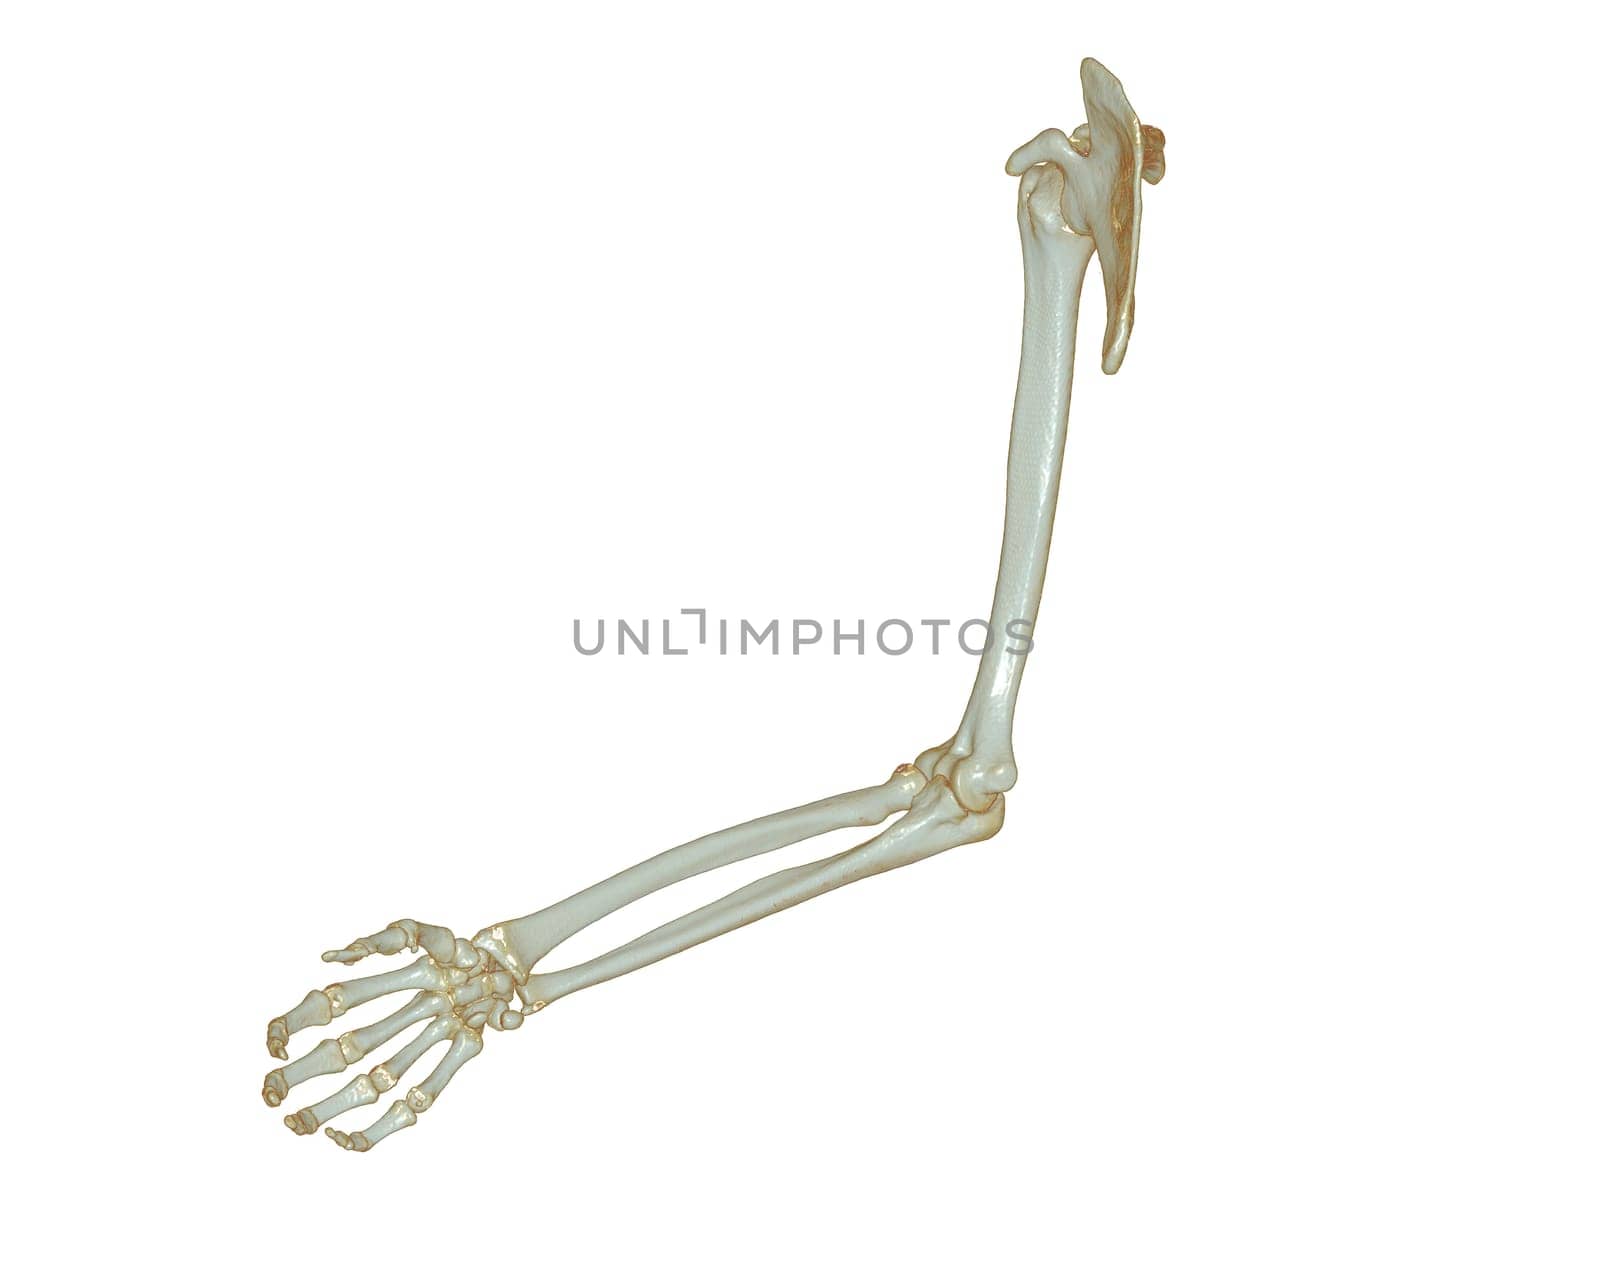 CT SCAN of Upper extremity 3D rendering isolated on white background .Clipping path. by samunella